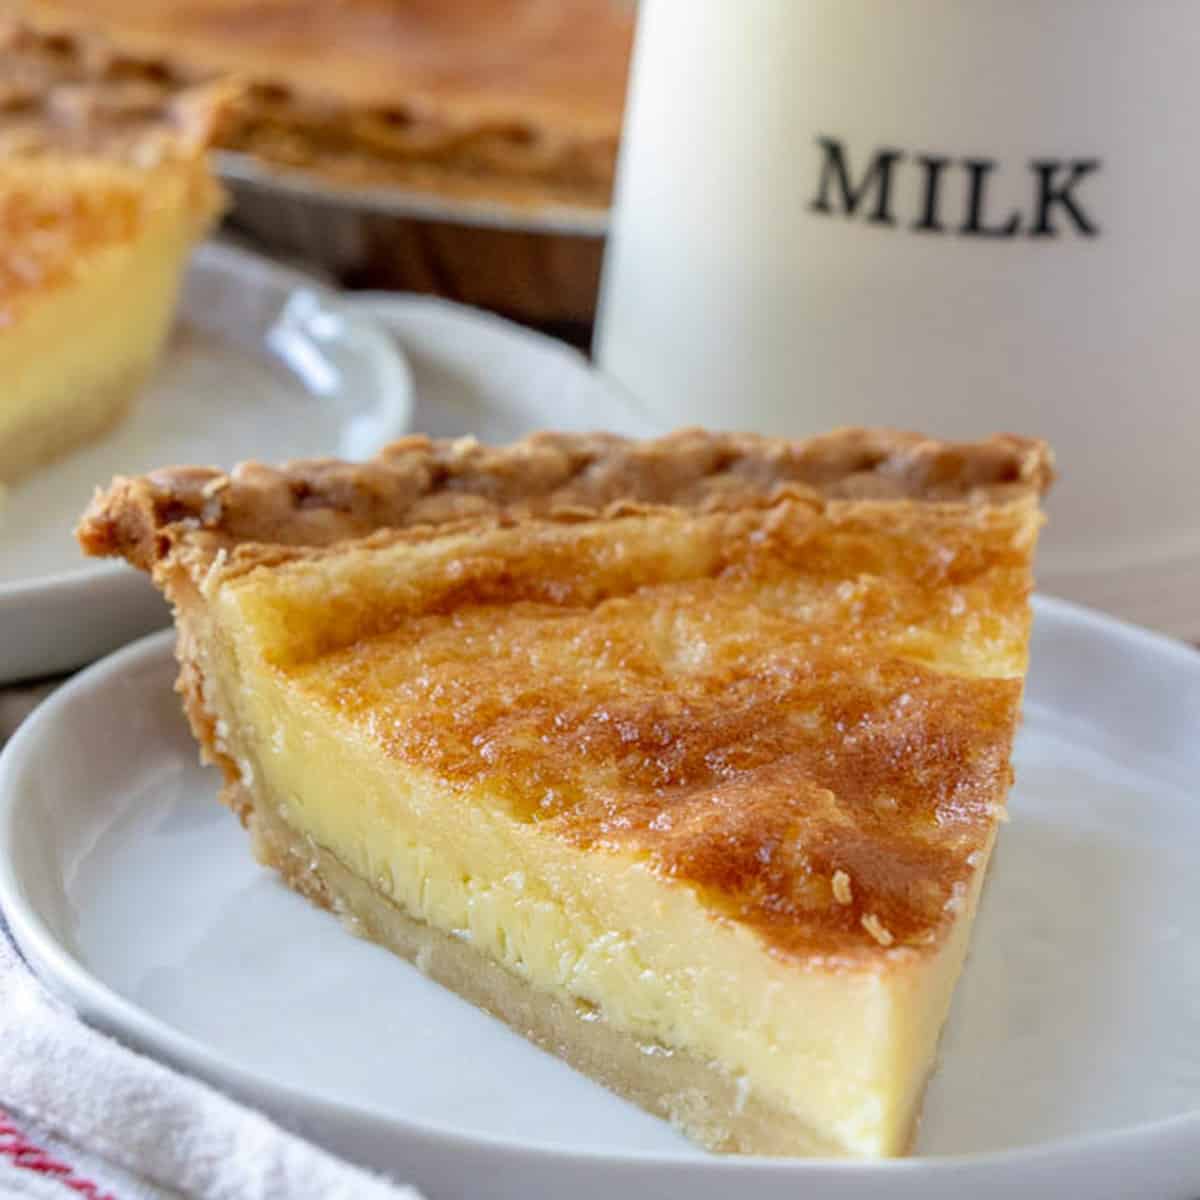 Buttermilk pie on a plate with a milk jug